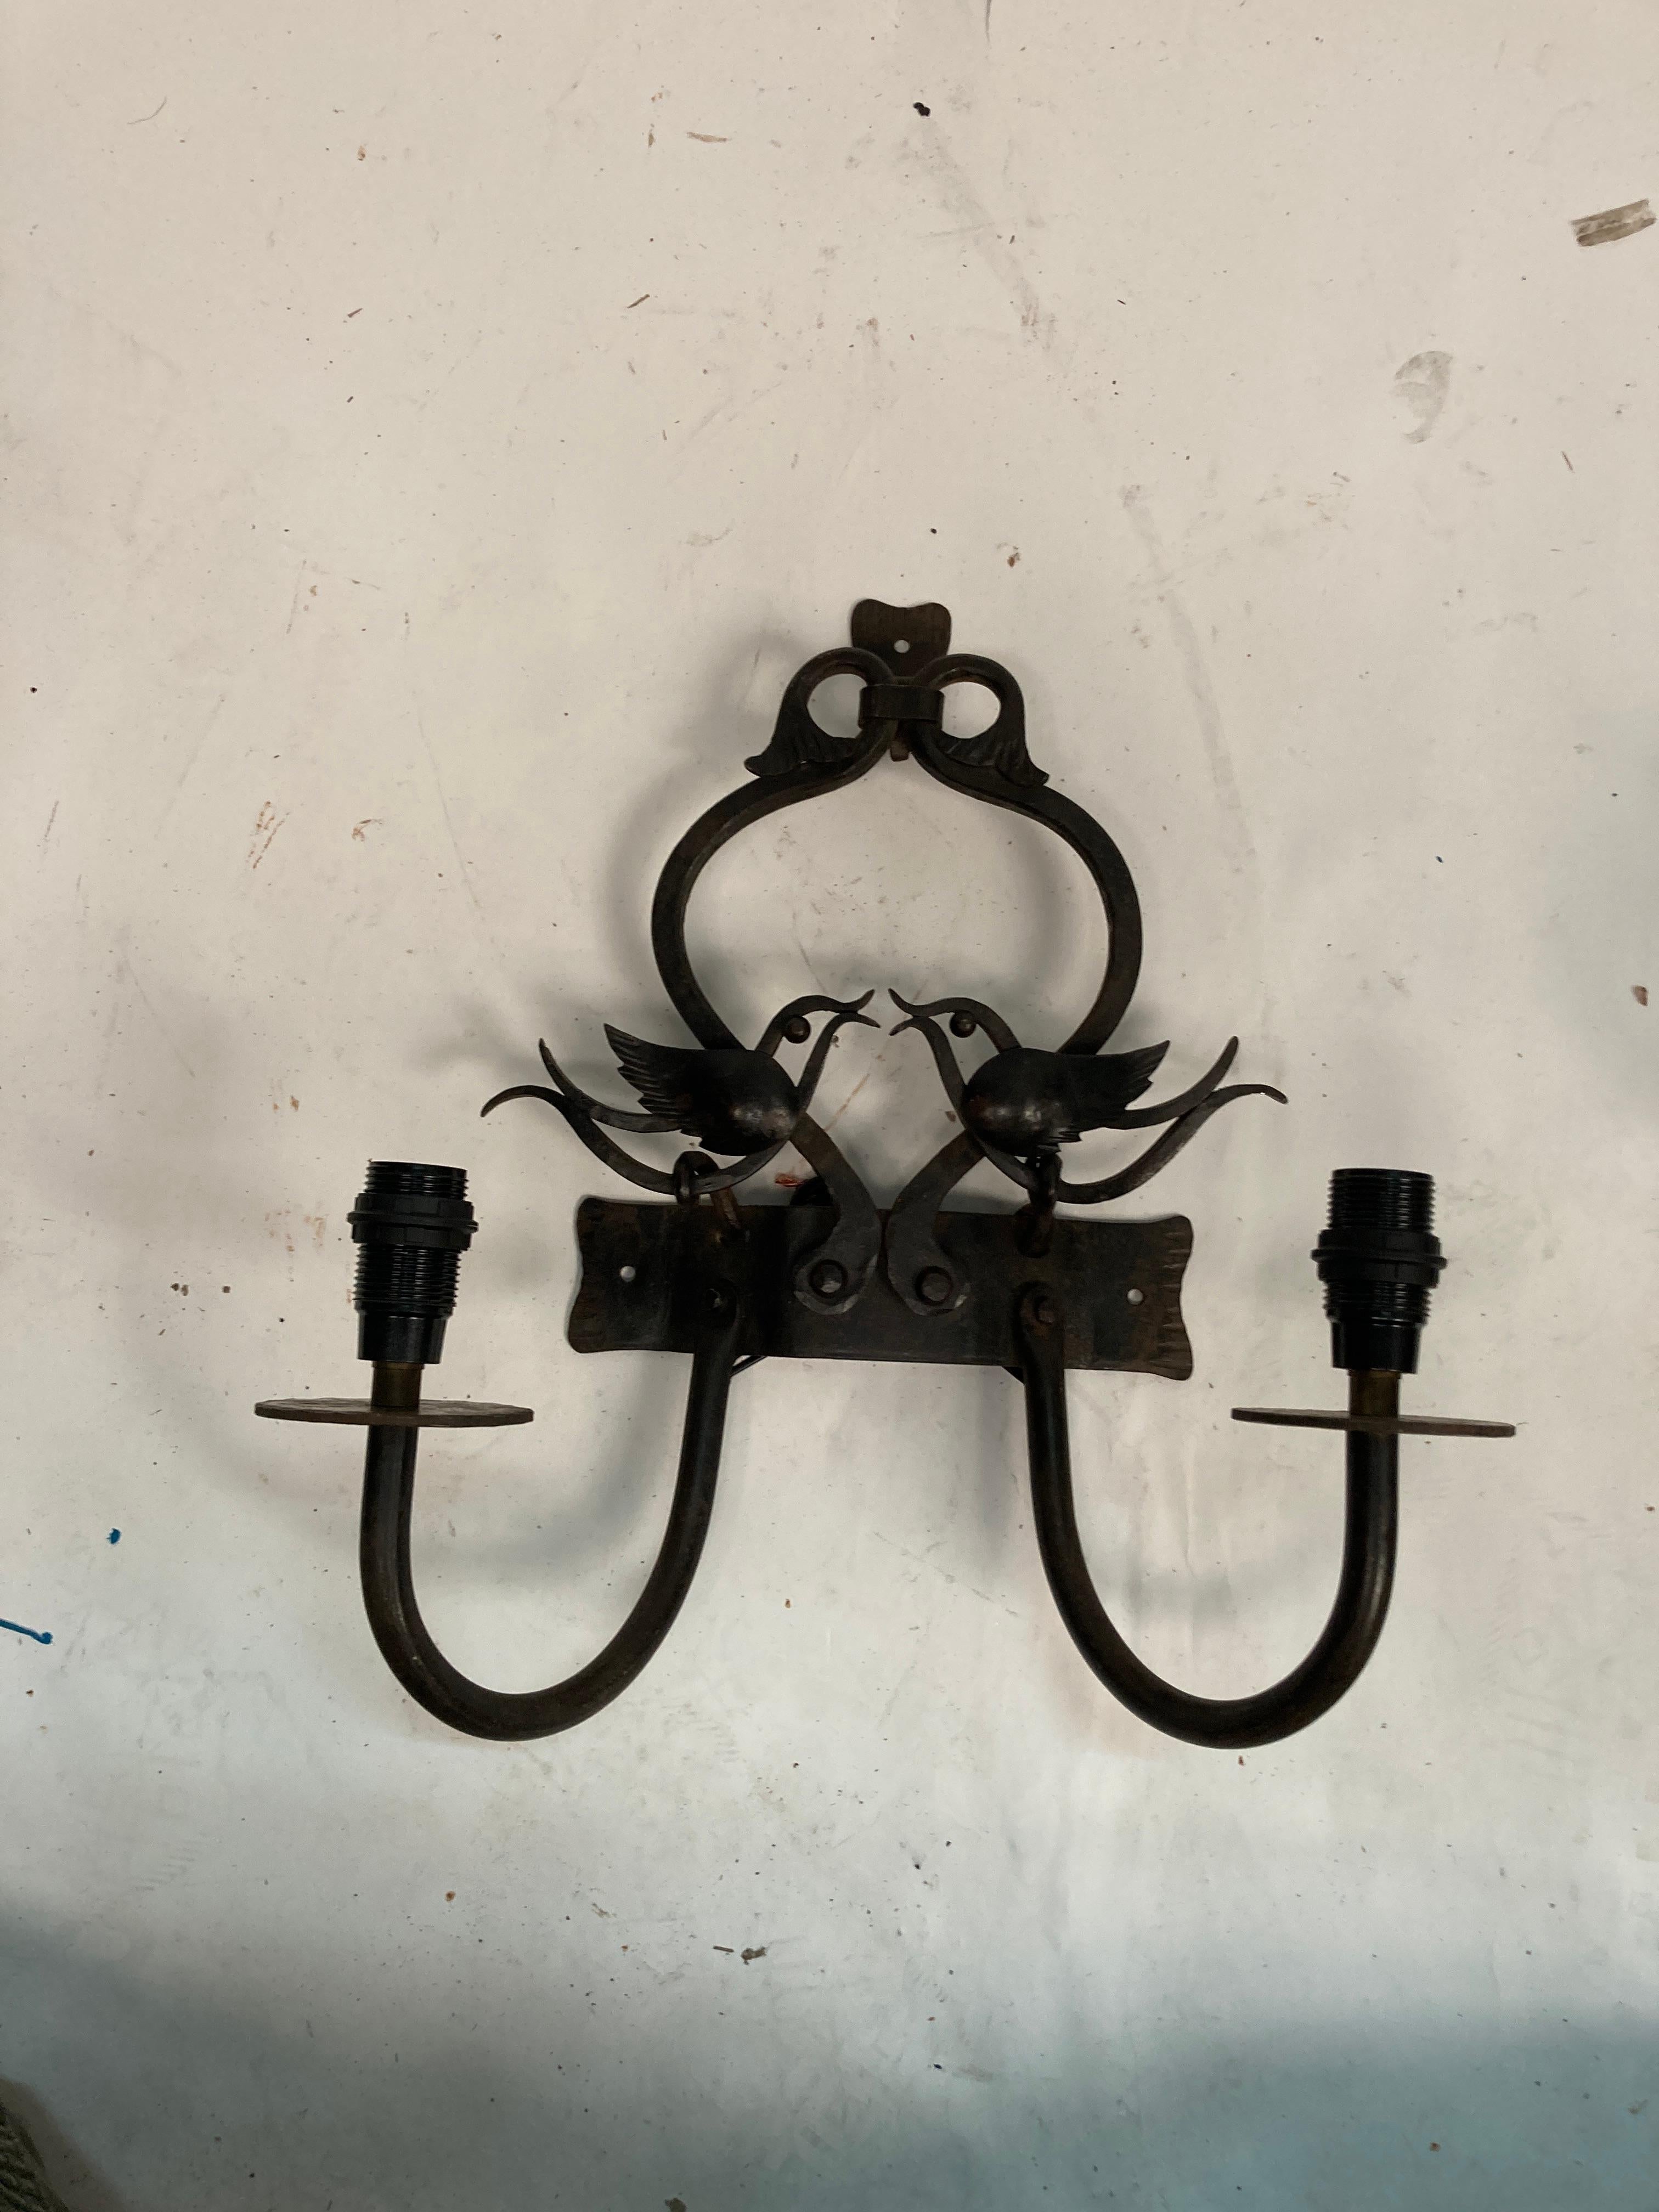 Pair of wrought iron handcraft sconces
Showing two birds kissing
Re-wired
